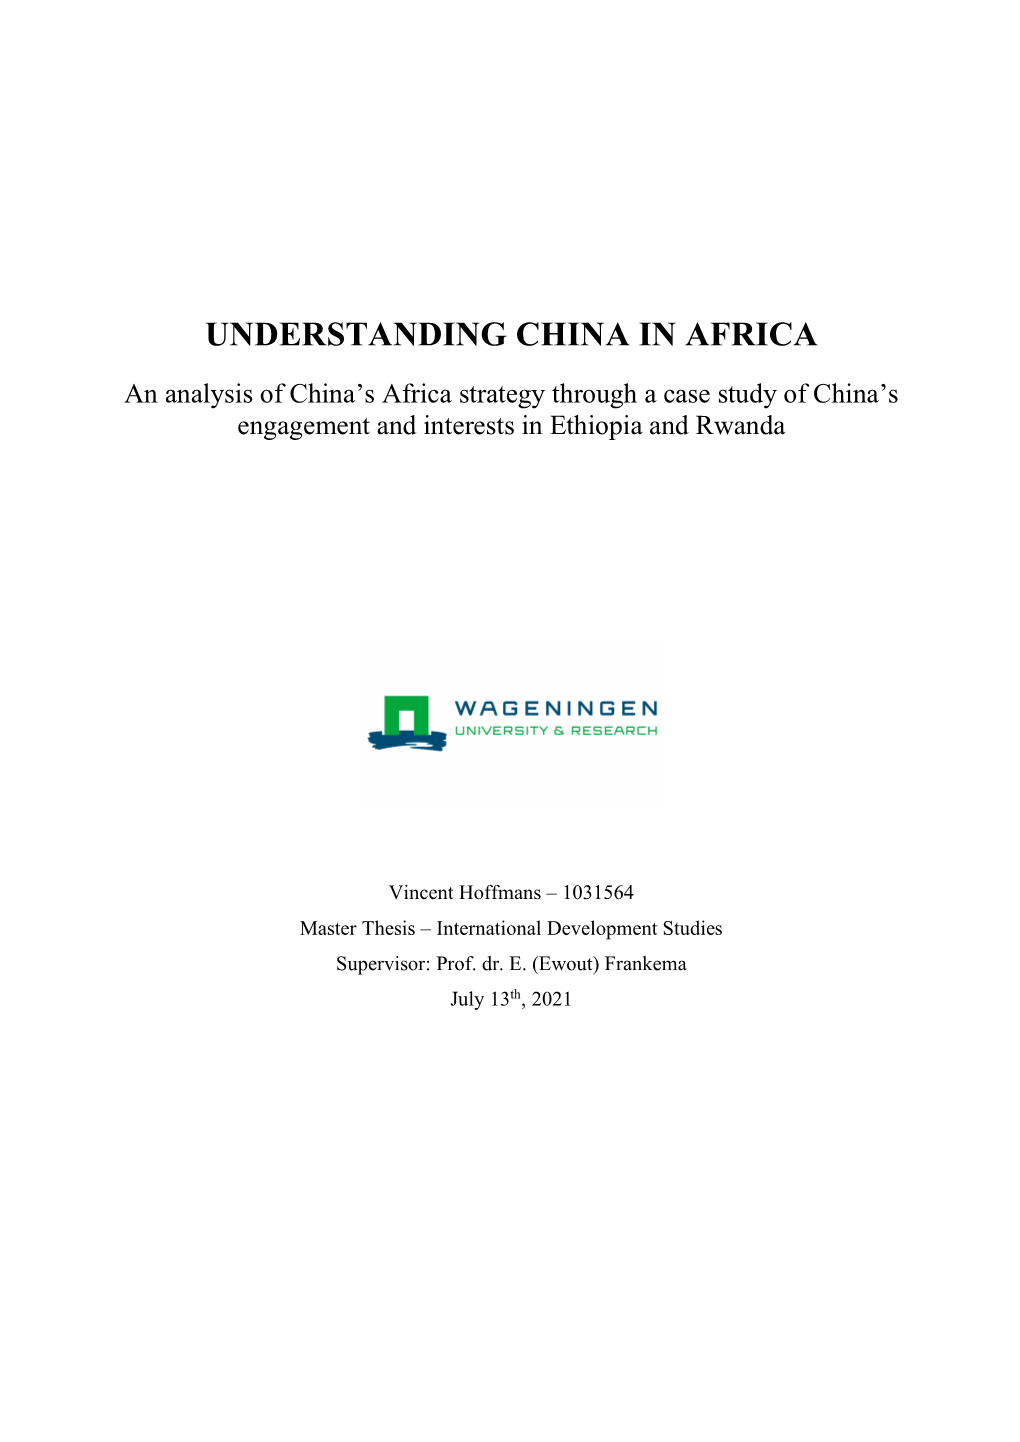 An Analysis of China's Africa Strategy Through a Case Study of China's